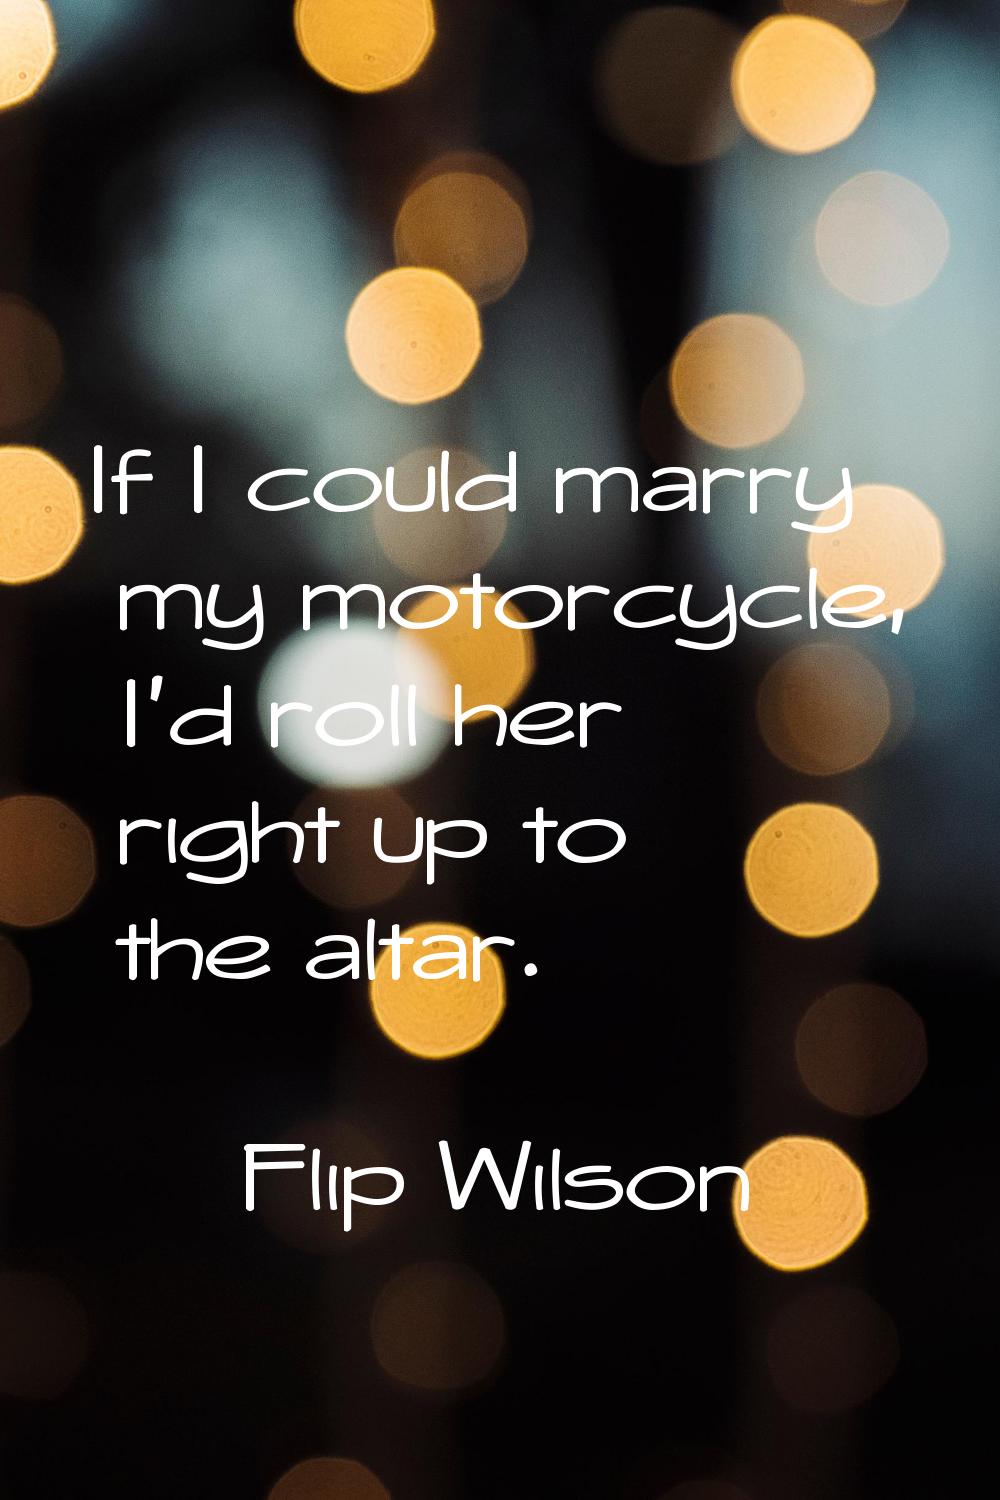 If I could marry my motorcycle, I'd roll her right up to the altar.